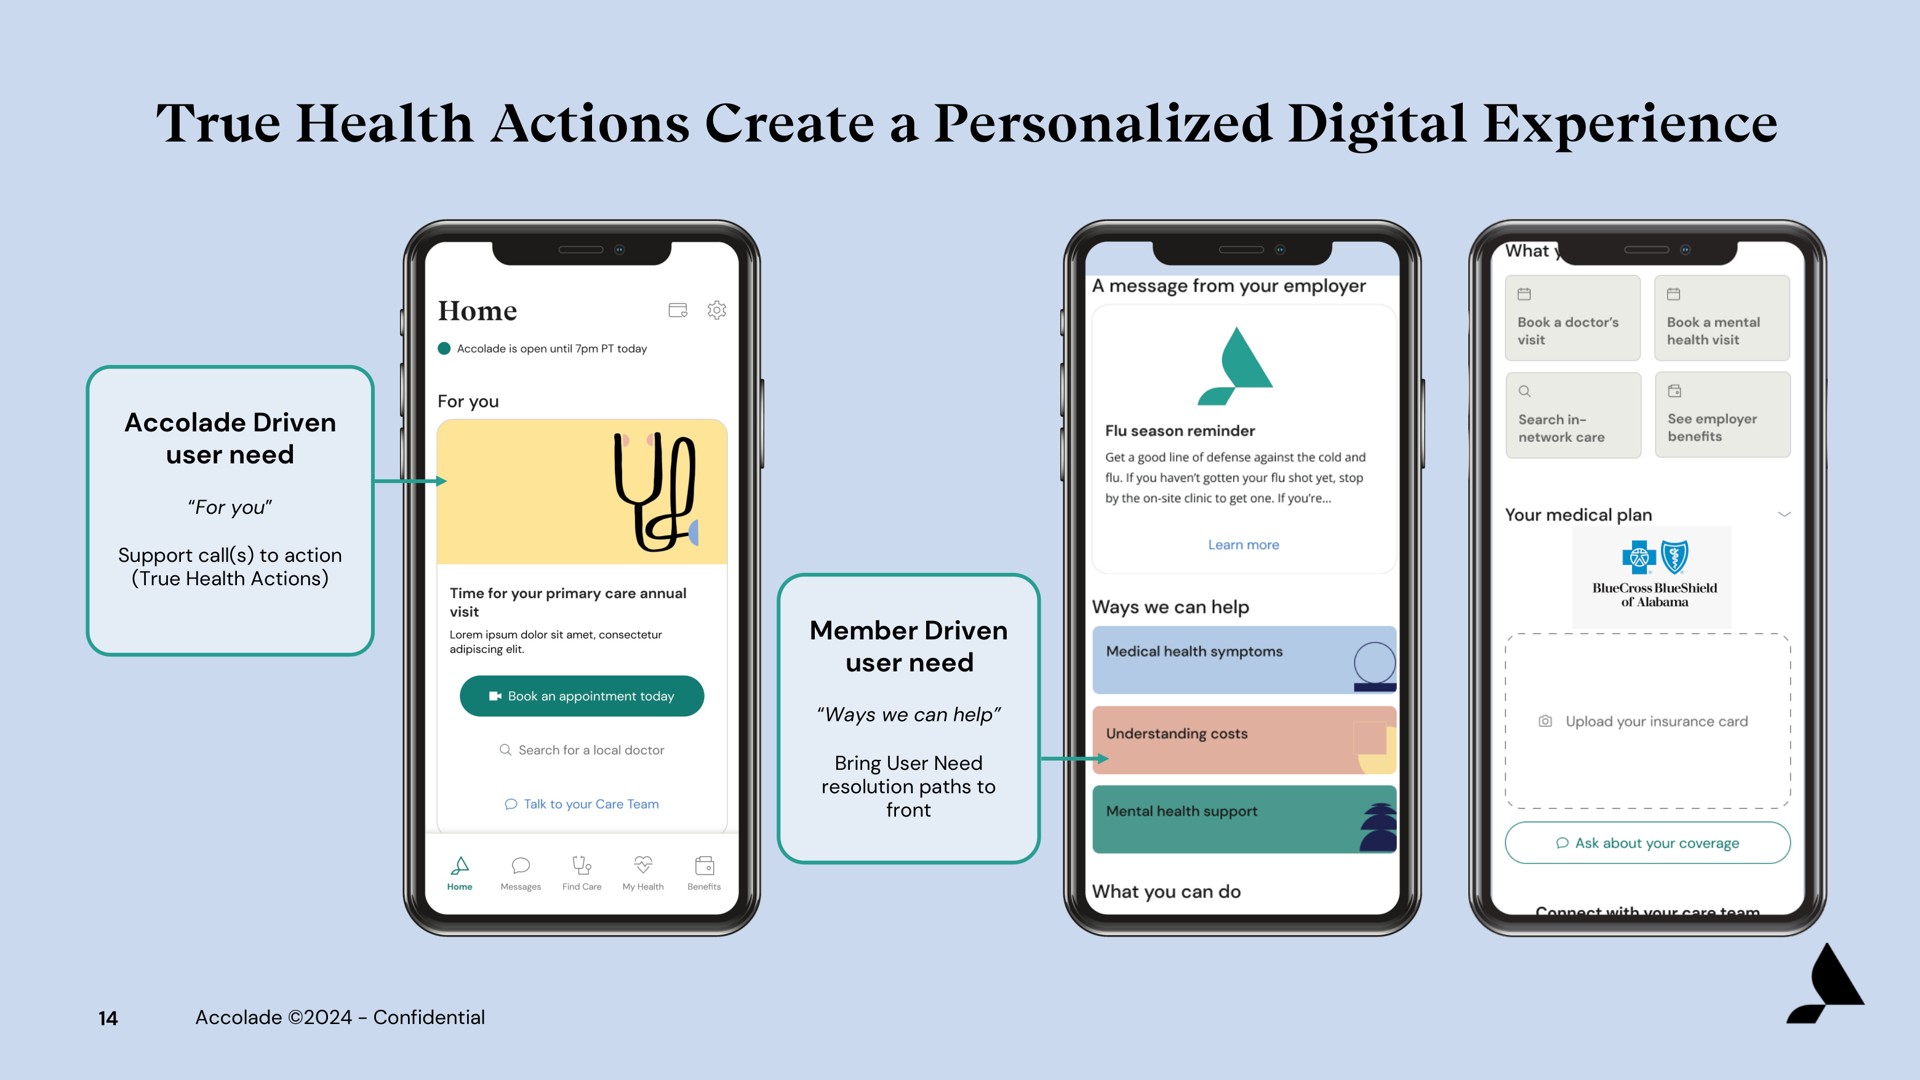 true health actions create a personalized digital experience | Accolade